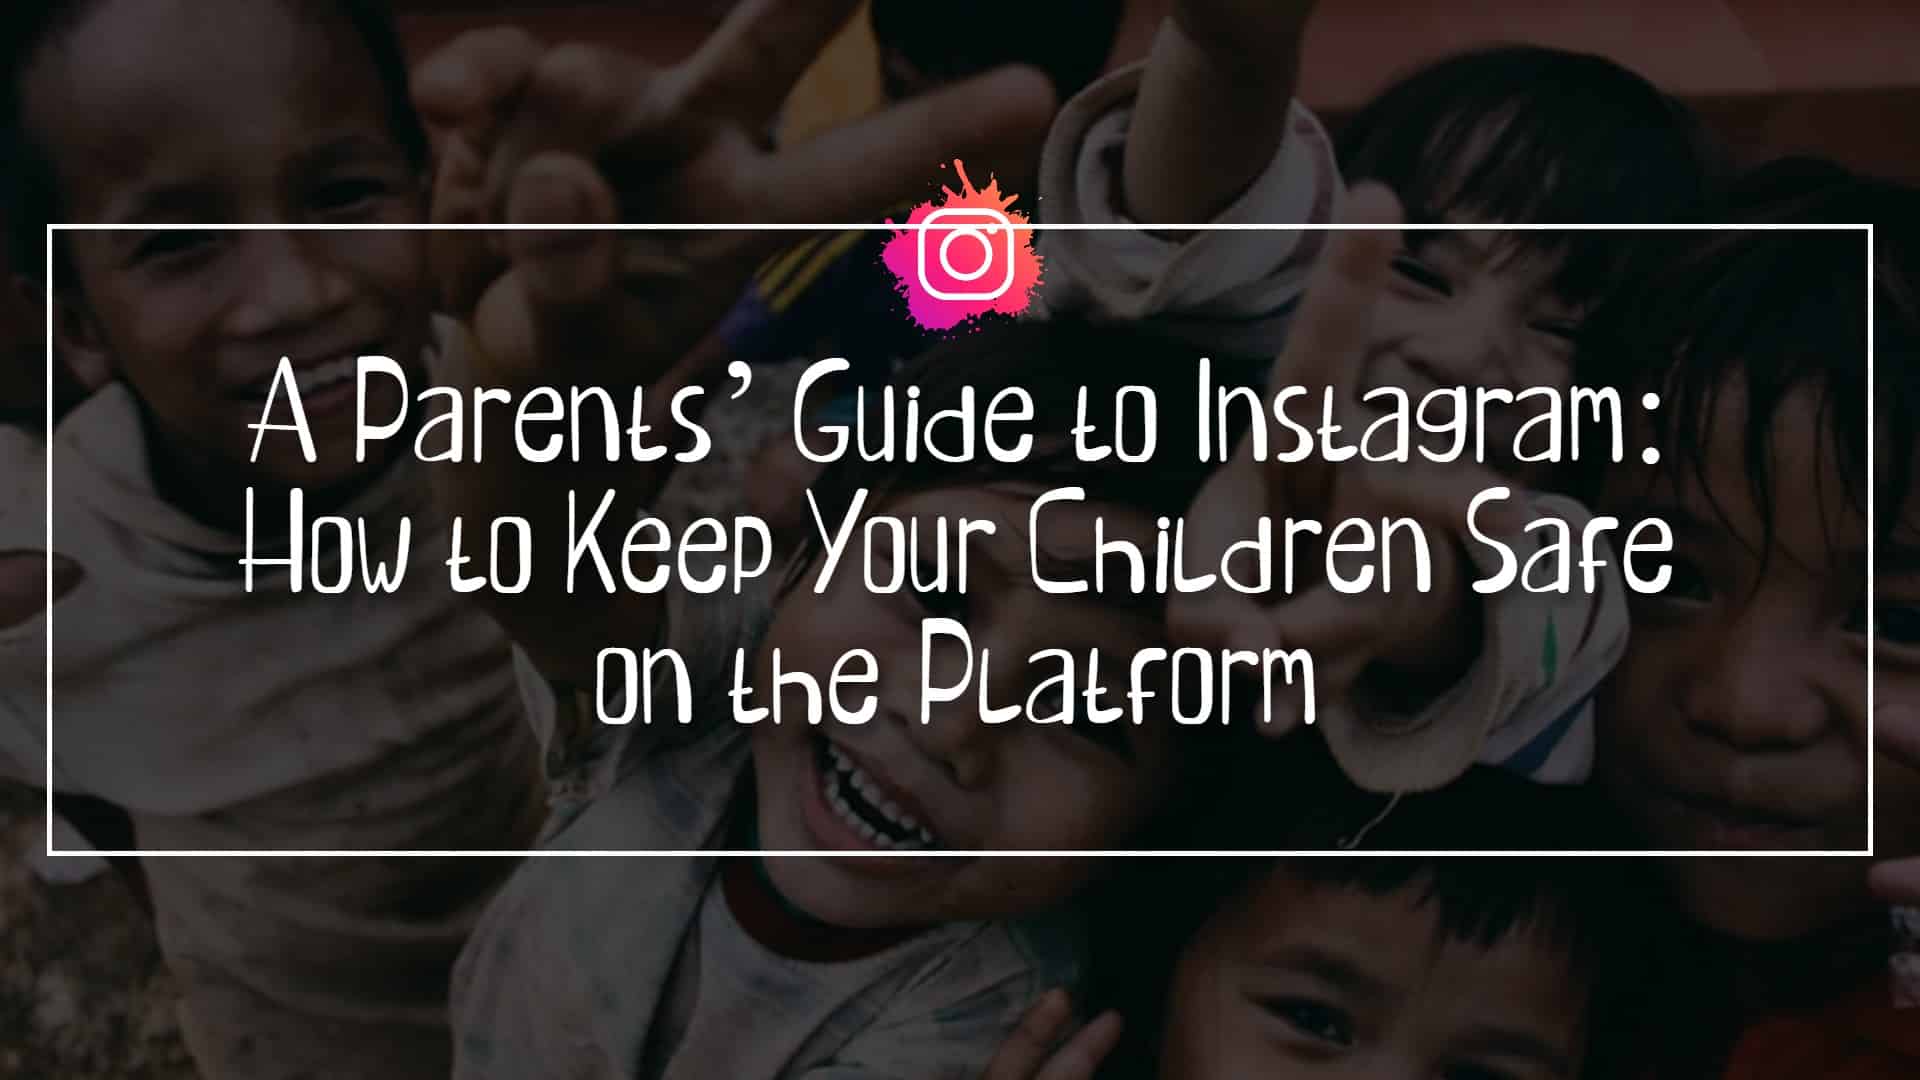 A-Parents-Guide-to-Instagram_-How-to-Keep-Your-Children-Safe-on-the-Platform.jpg